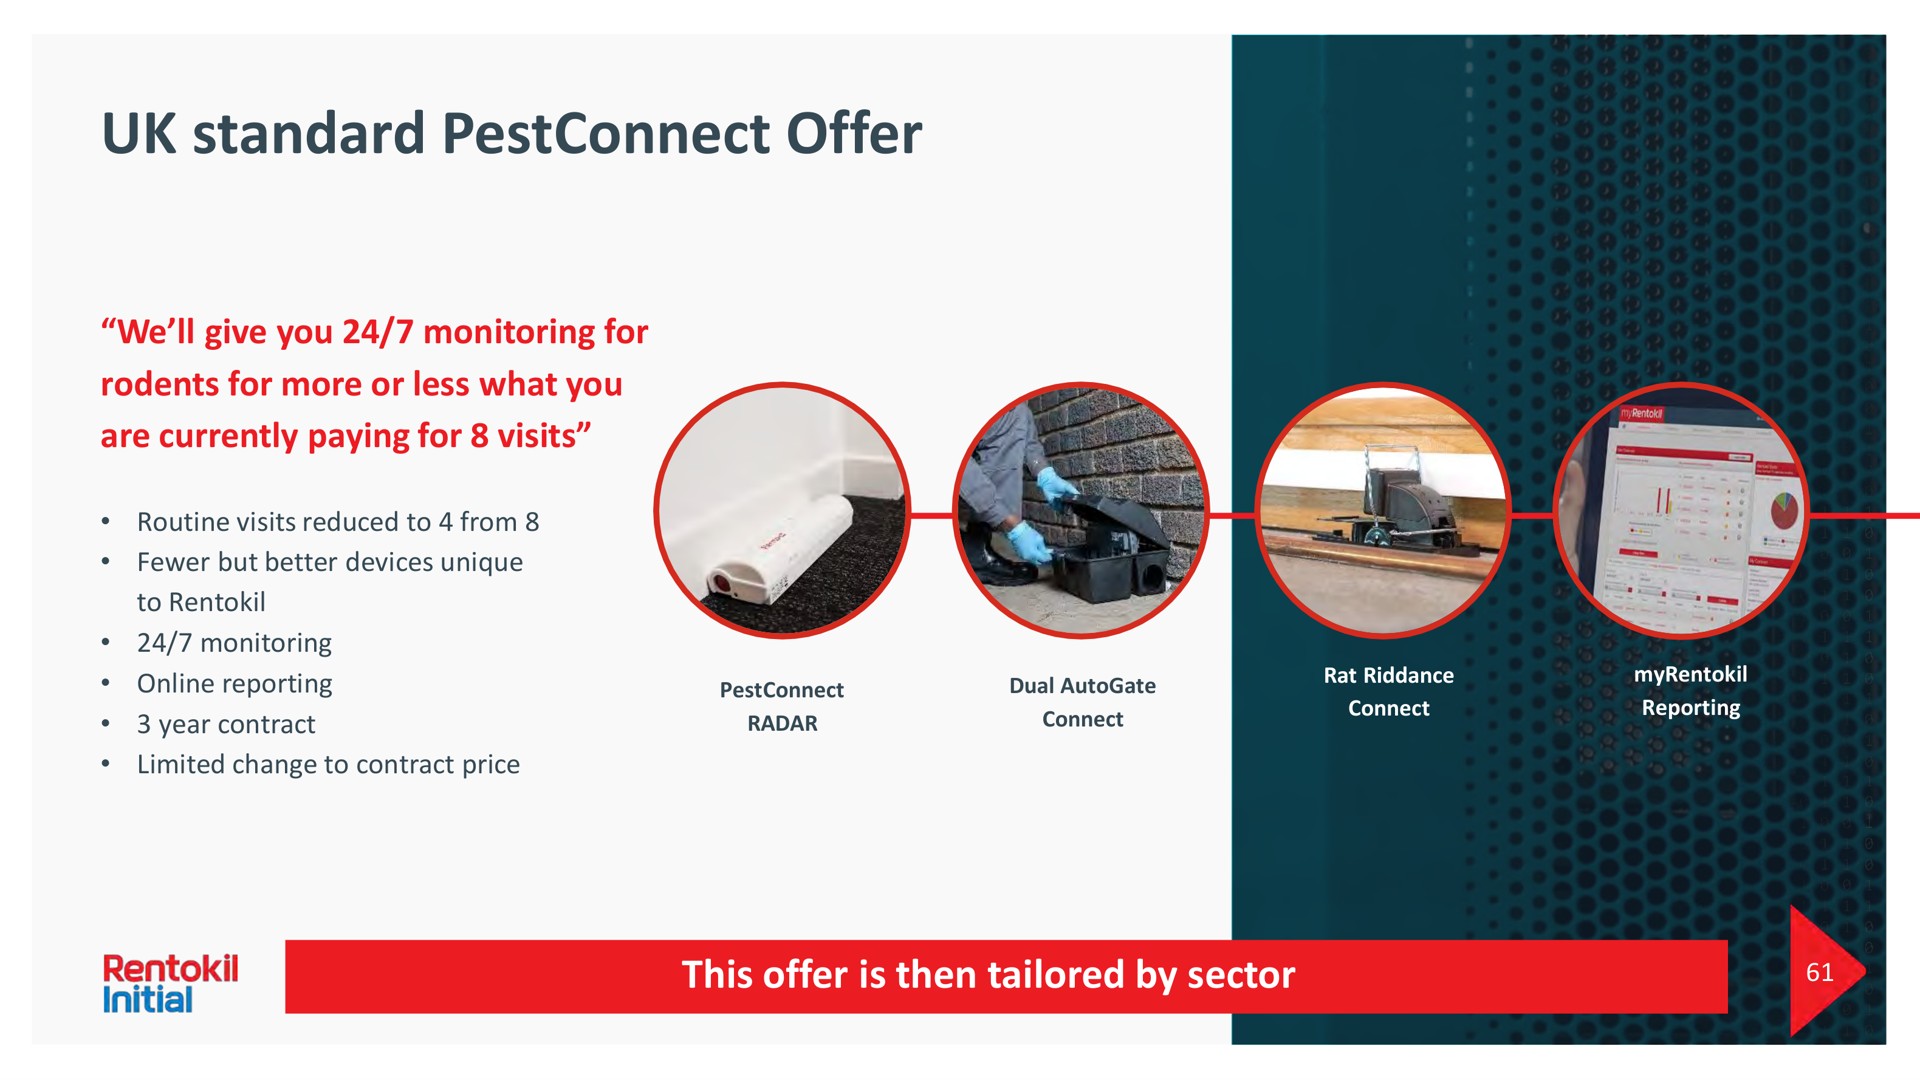 standard offer we give you monitoring for rodents for more or less what you are currently paying for visits this offer is then tailored by sector | Rentokil Initial